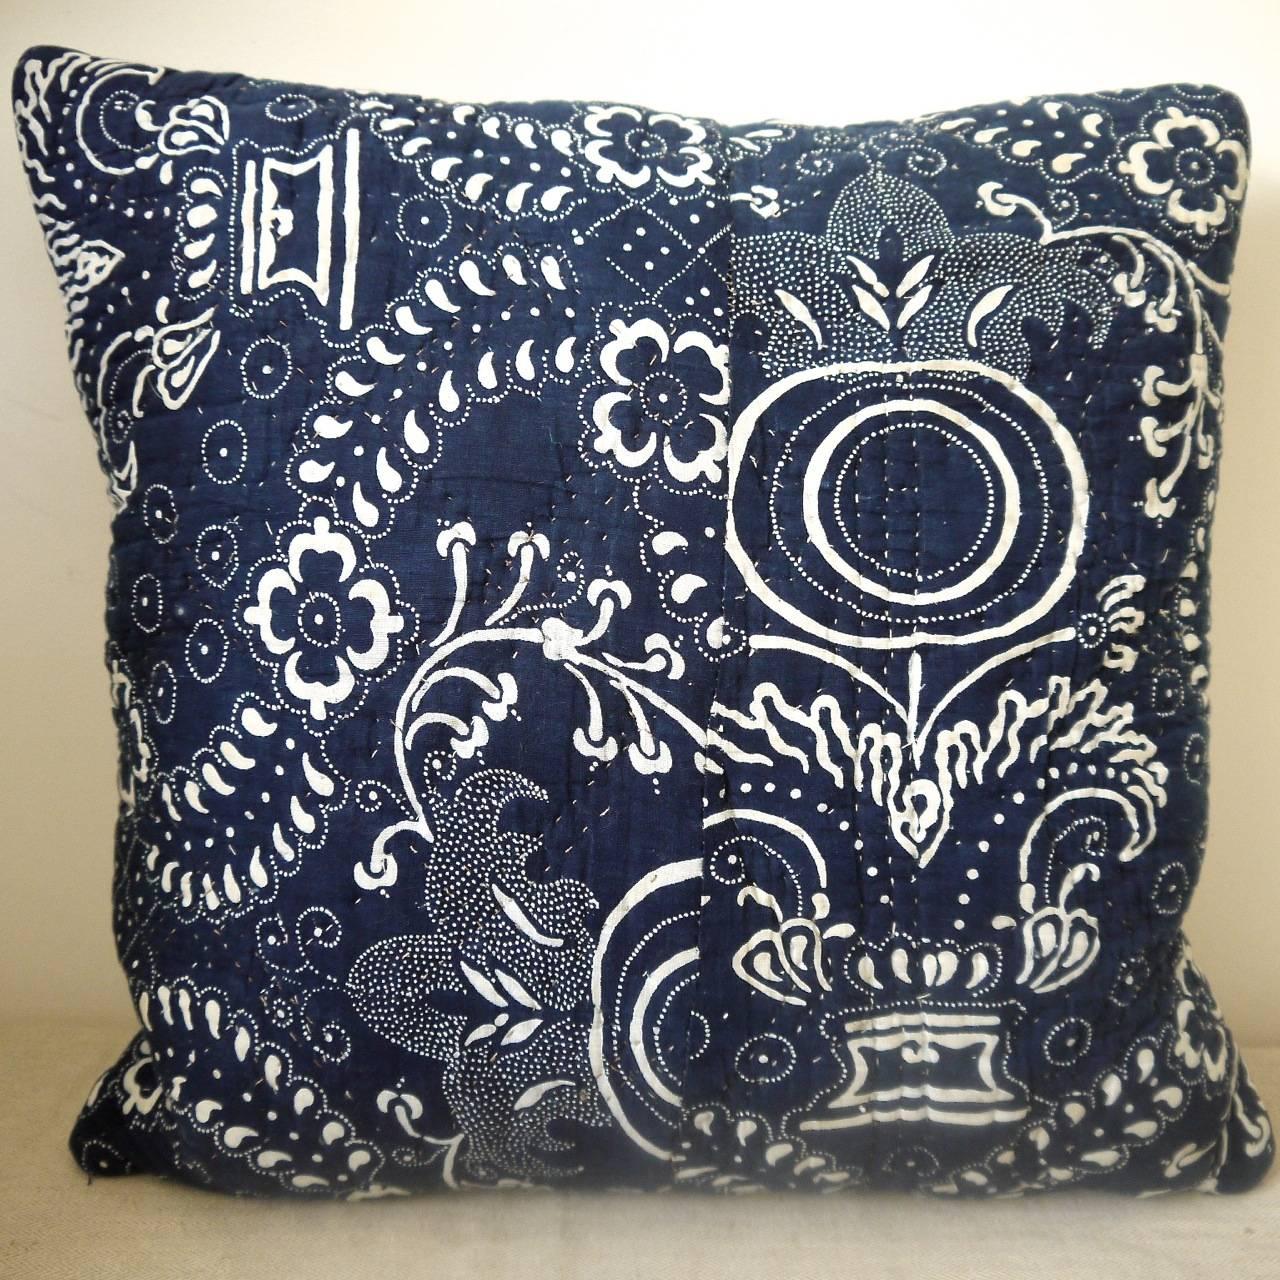 French dated 1800 indigo resist block printed cotton cushion. A striking design of pomegranite and floral motifs. Simply quilted and printed on a soft cotton and backed in a dyed 19th century French linen. There is a seam about halfway across with